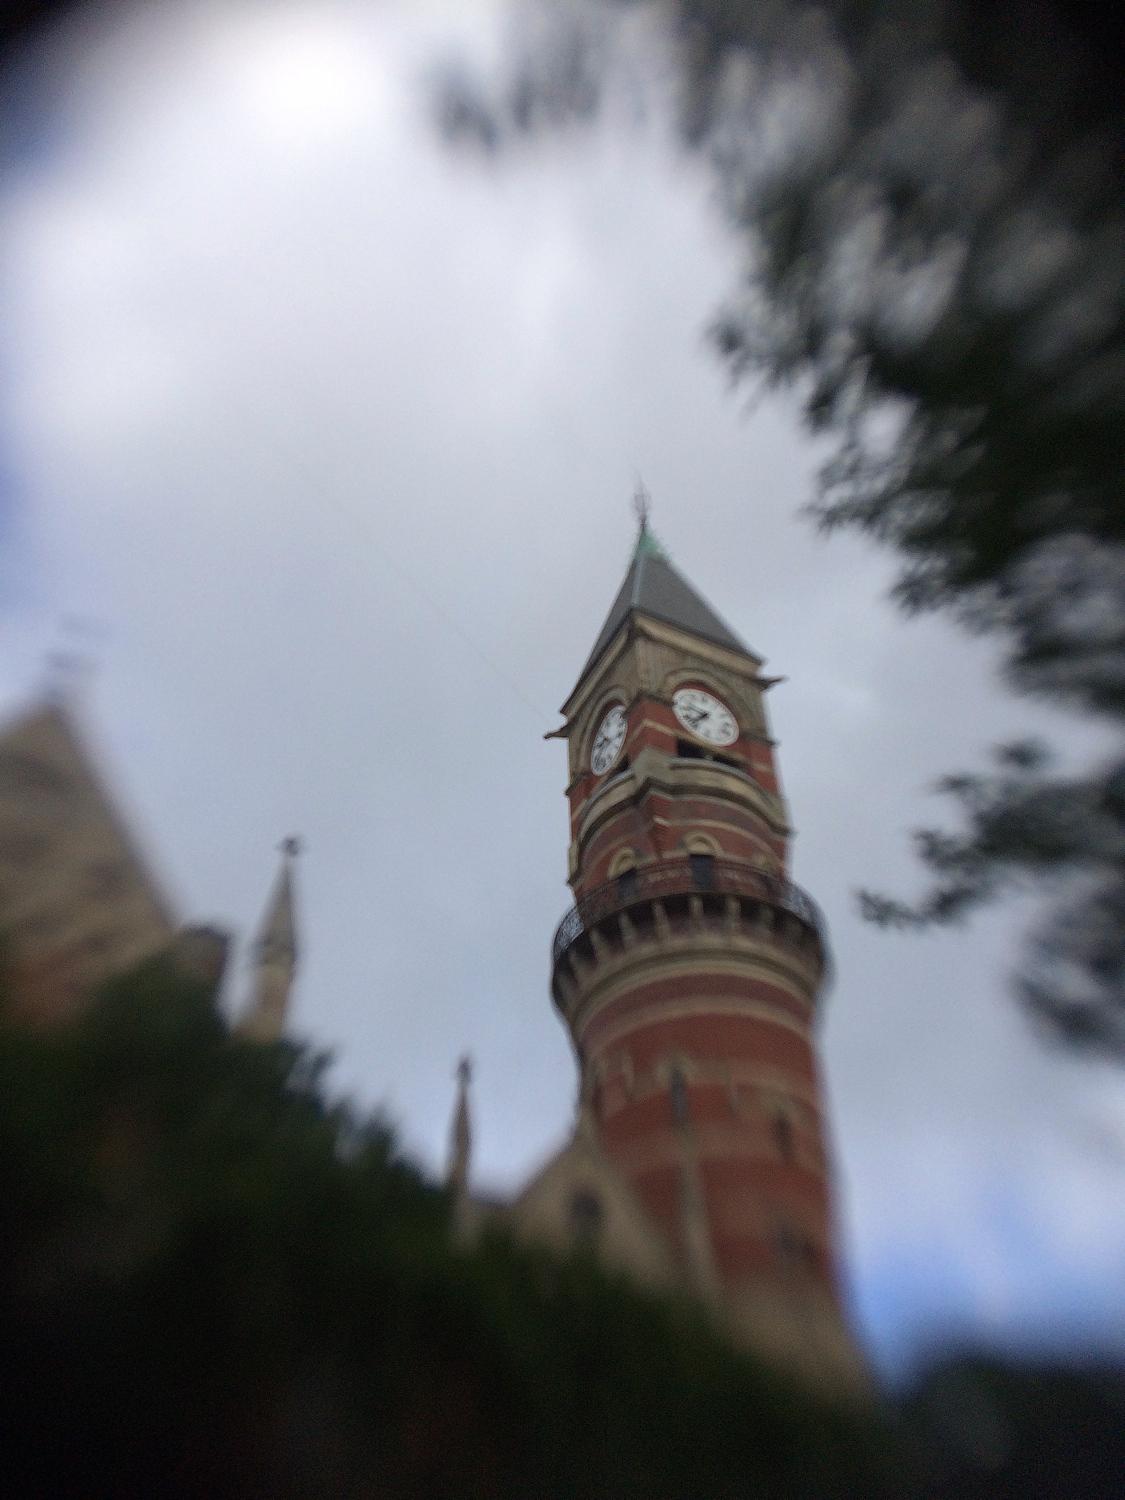 blurs arent defects but the charm in lensbabys new mobile lens kit lensbaby creative sample 14